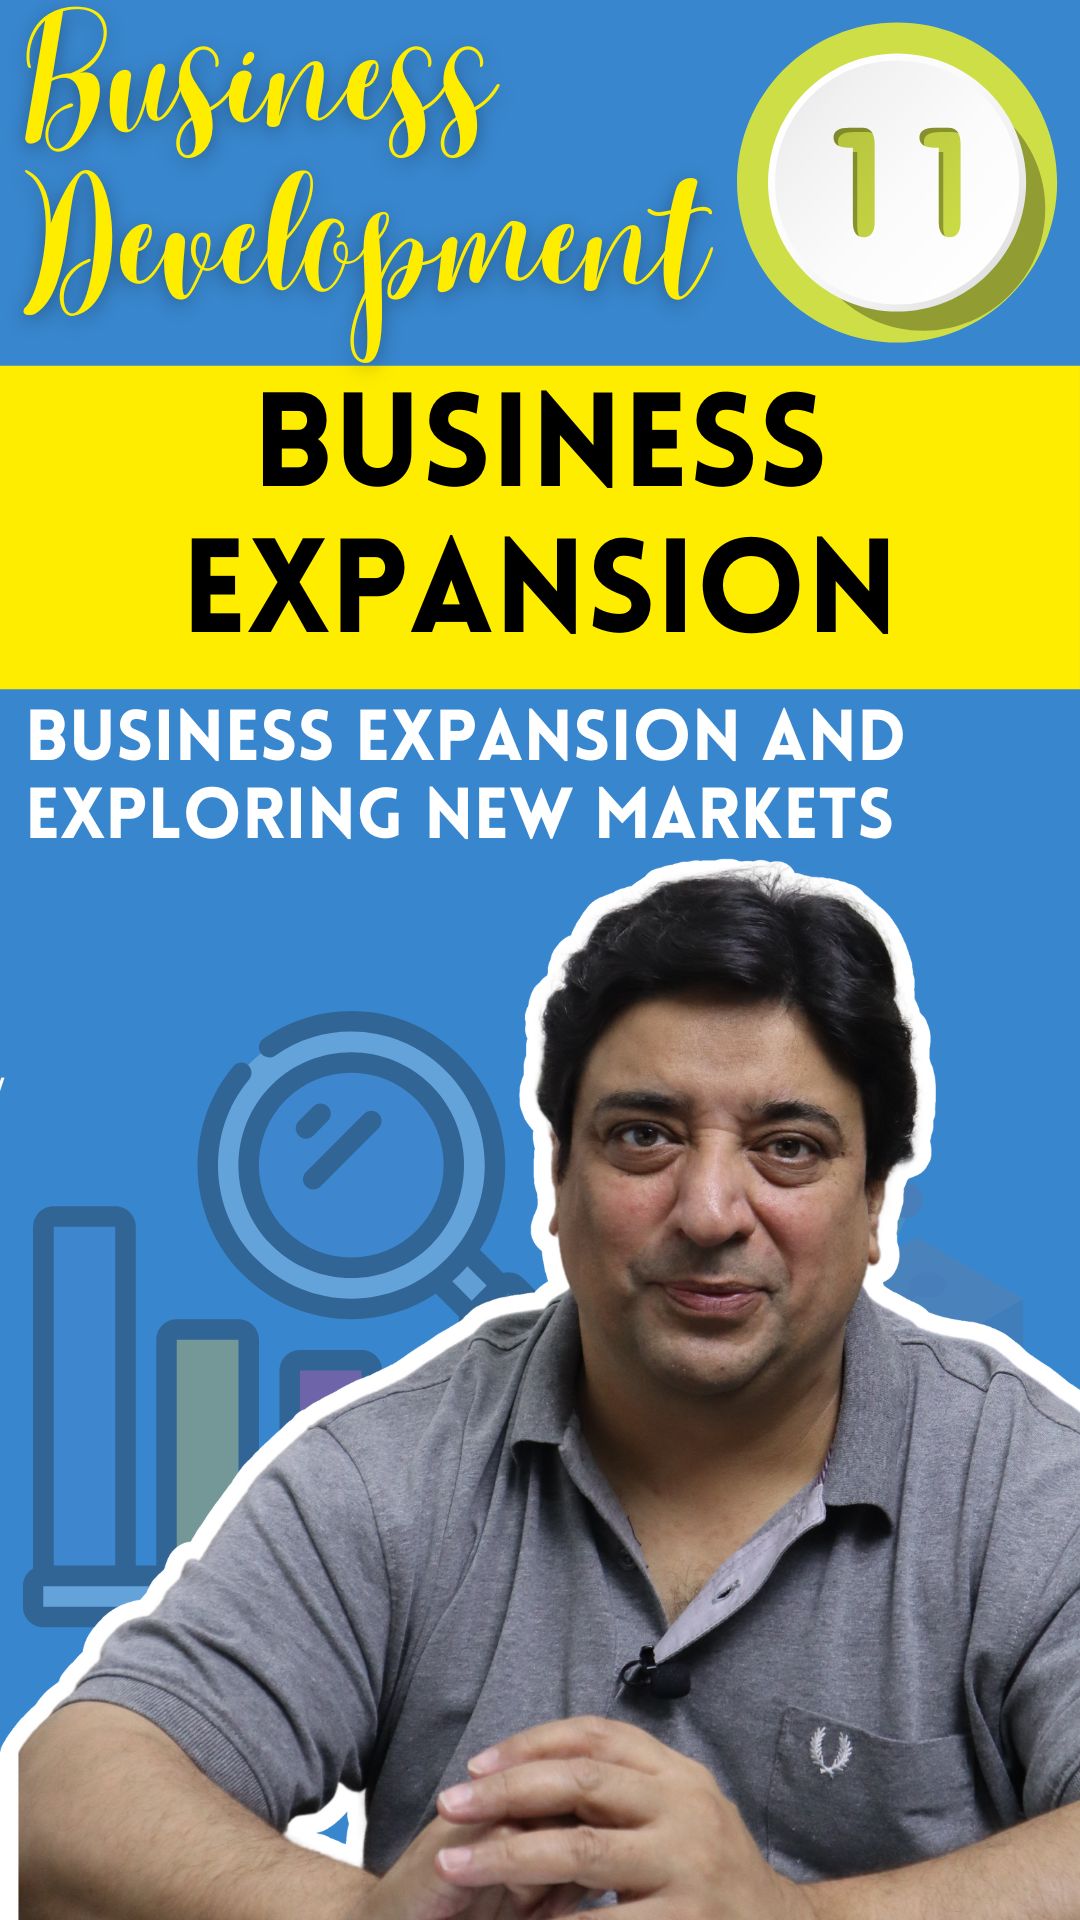 Why Business expansion and exploring new markets is important